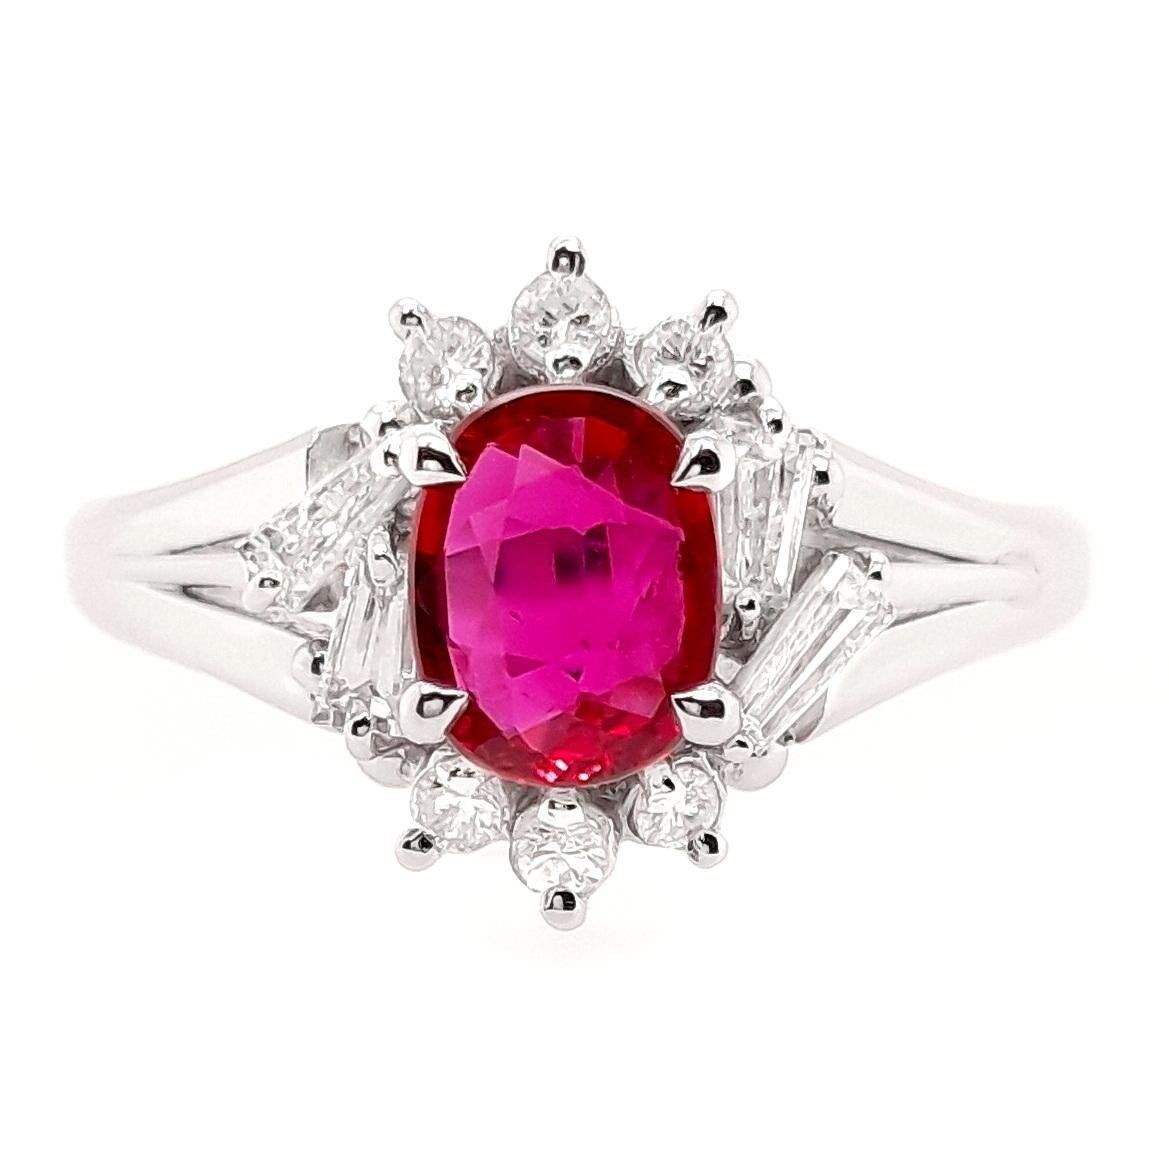 Sparkle in style with our Top Crown Jewelry House collection platinum ring, showcasing natural oval-cut ruby and shiny natural diamonds. A touch of luxury for your everyday ensemble.

This ring is certified by IGI laboratory, report number: